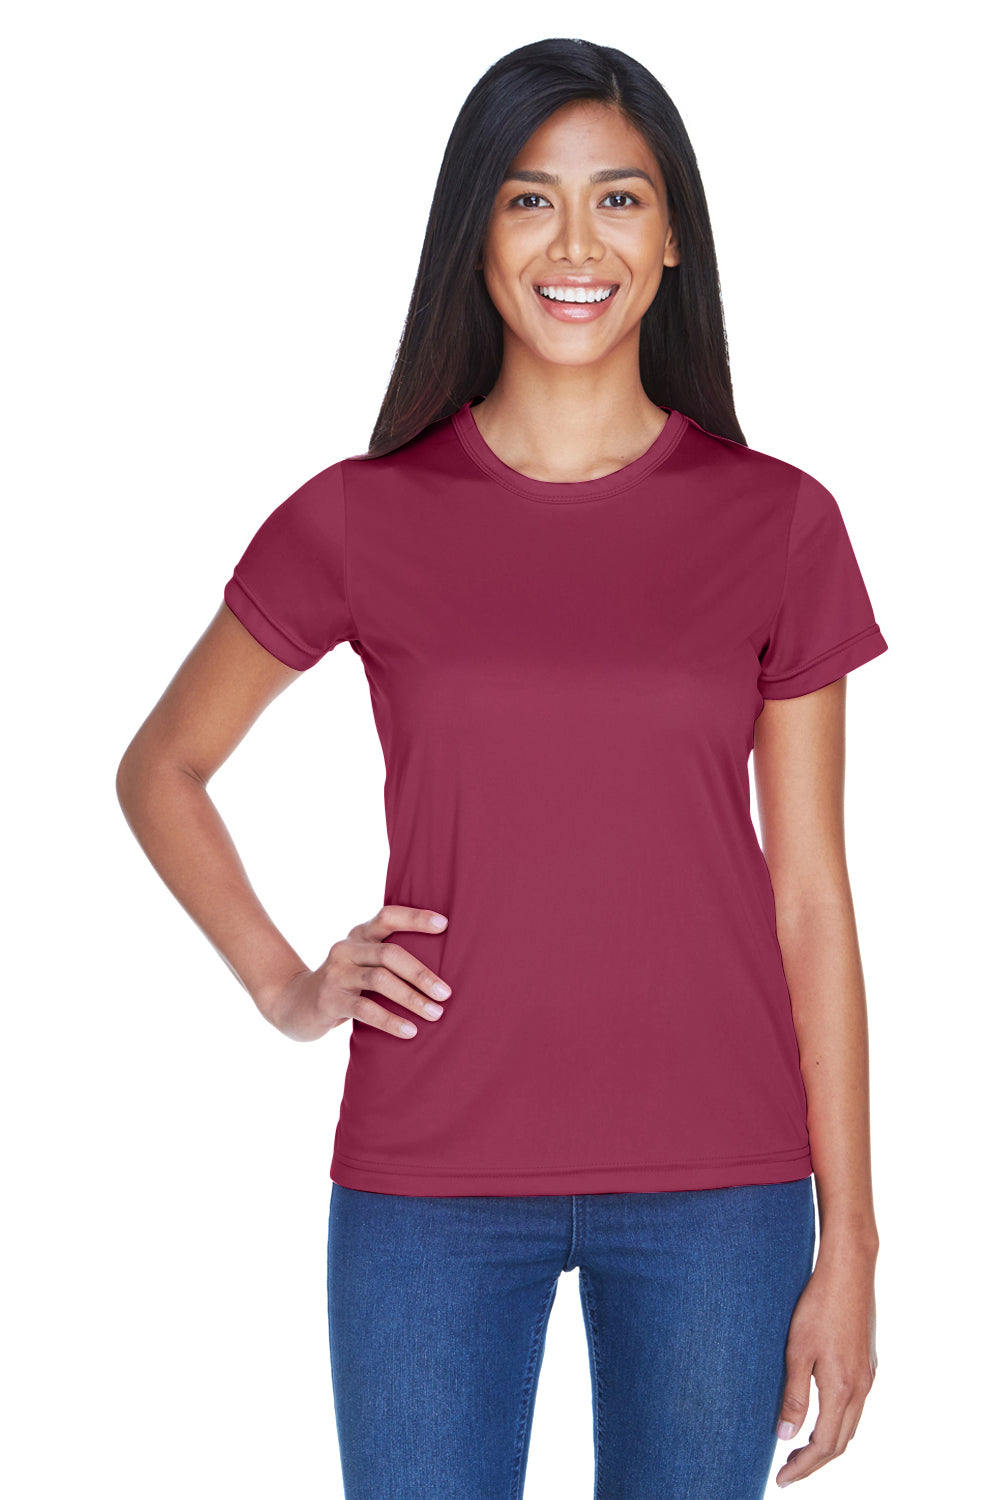 UltraClub 8420L Womens Cool & Dry Performance Moisture Wicking Short Sleeve Crewneck T-Shirt Maroon Front